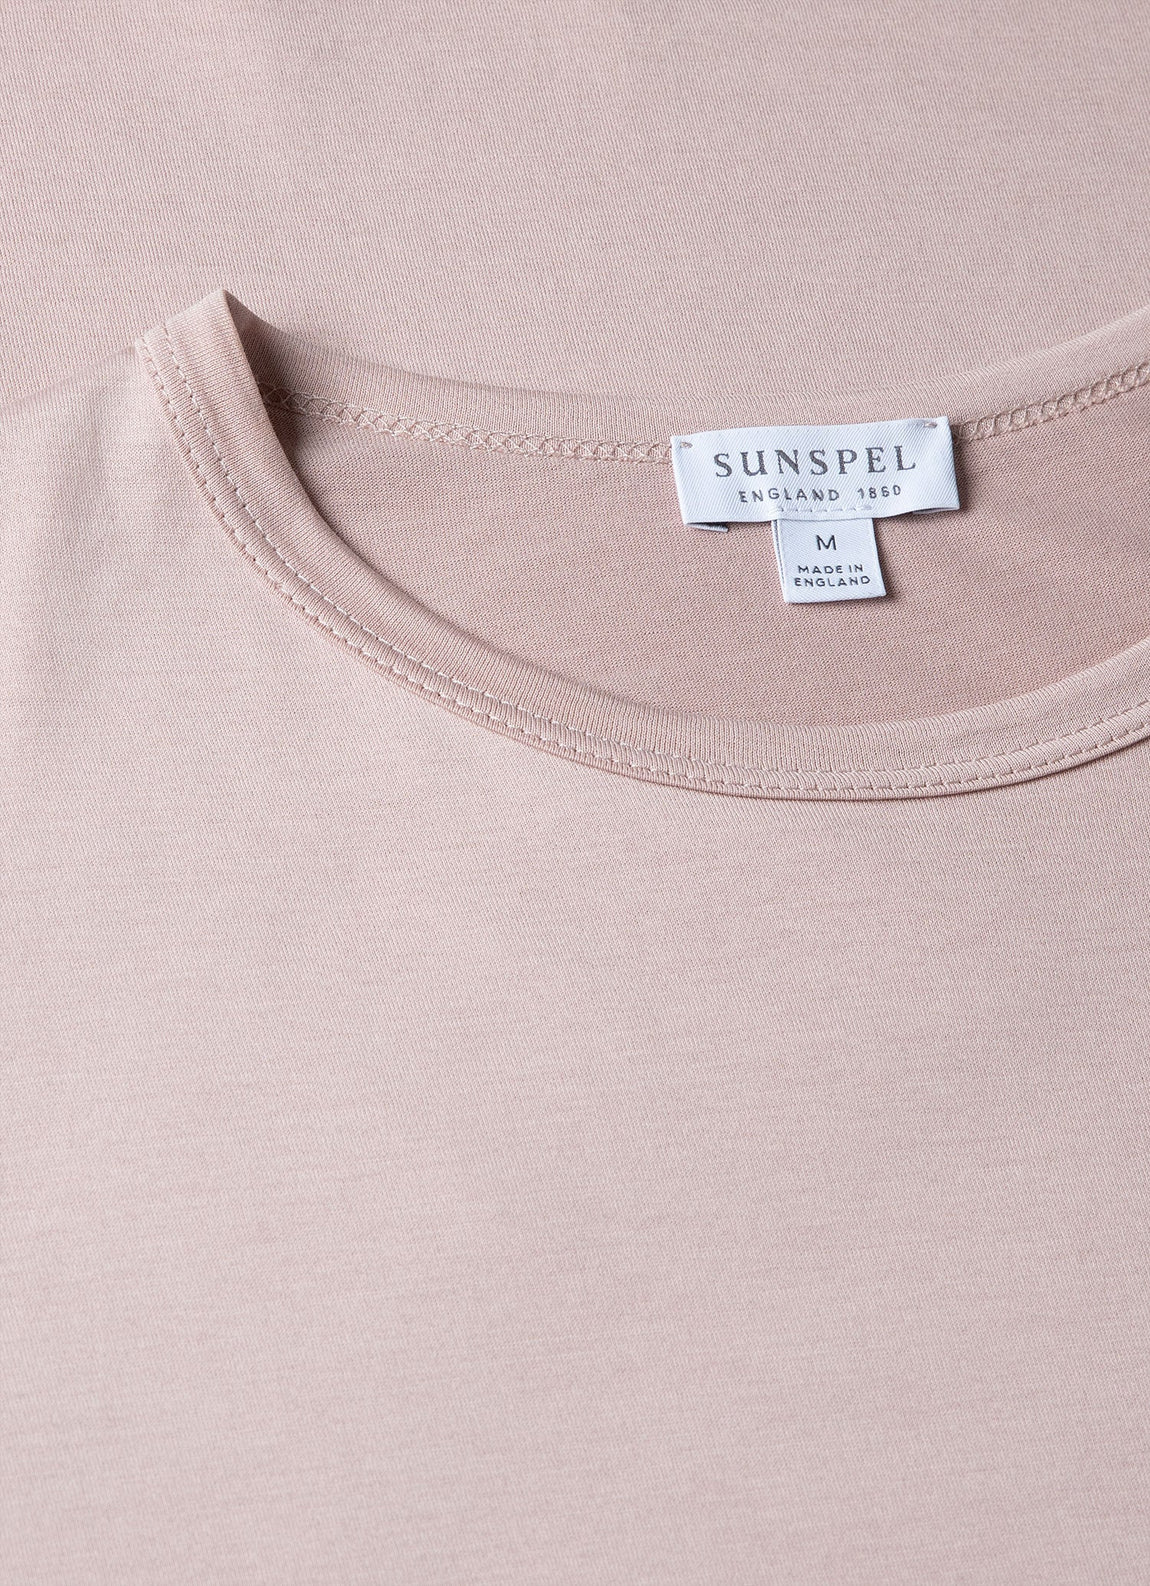 Men's Classic T-shirt in Pale Pink